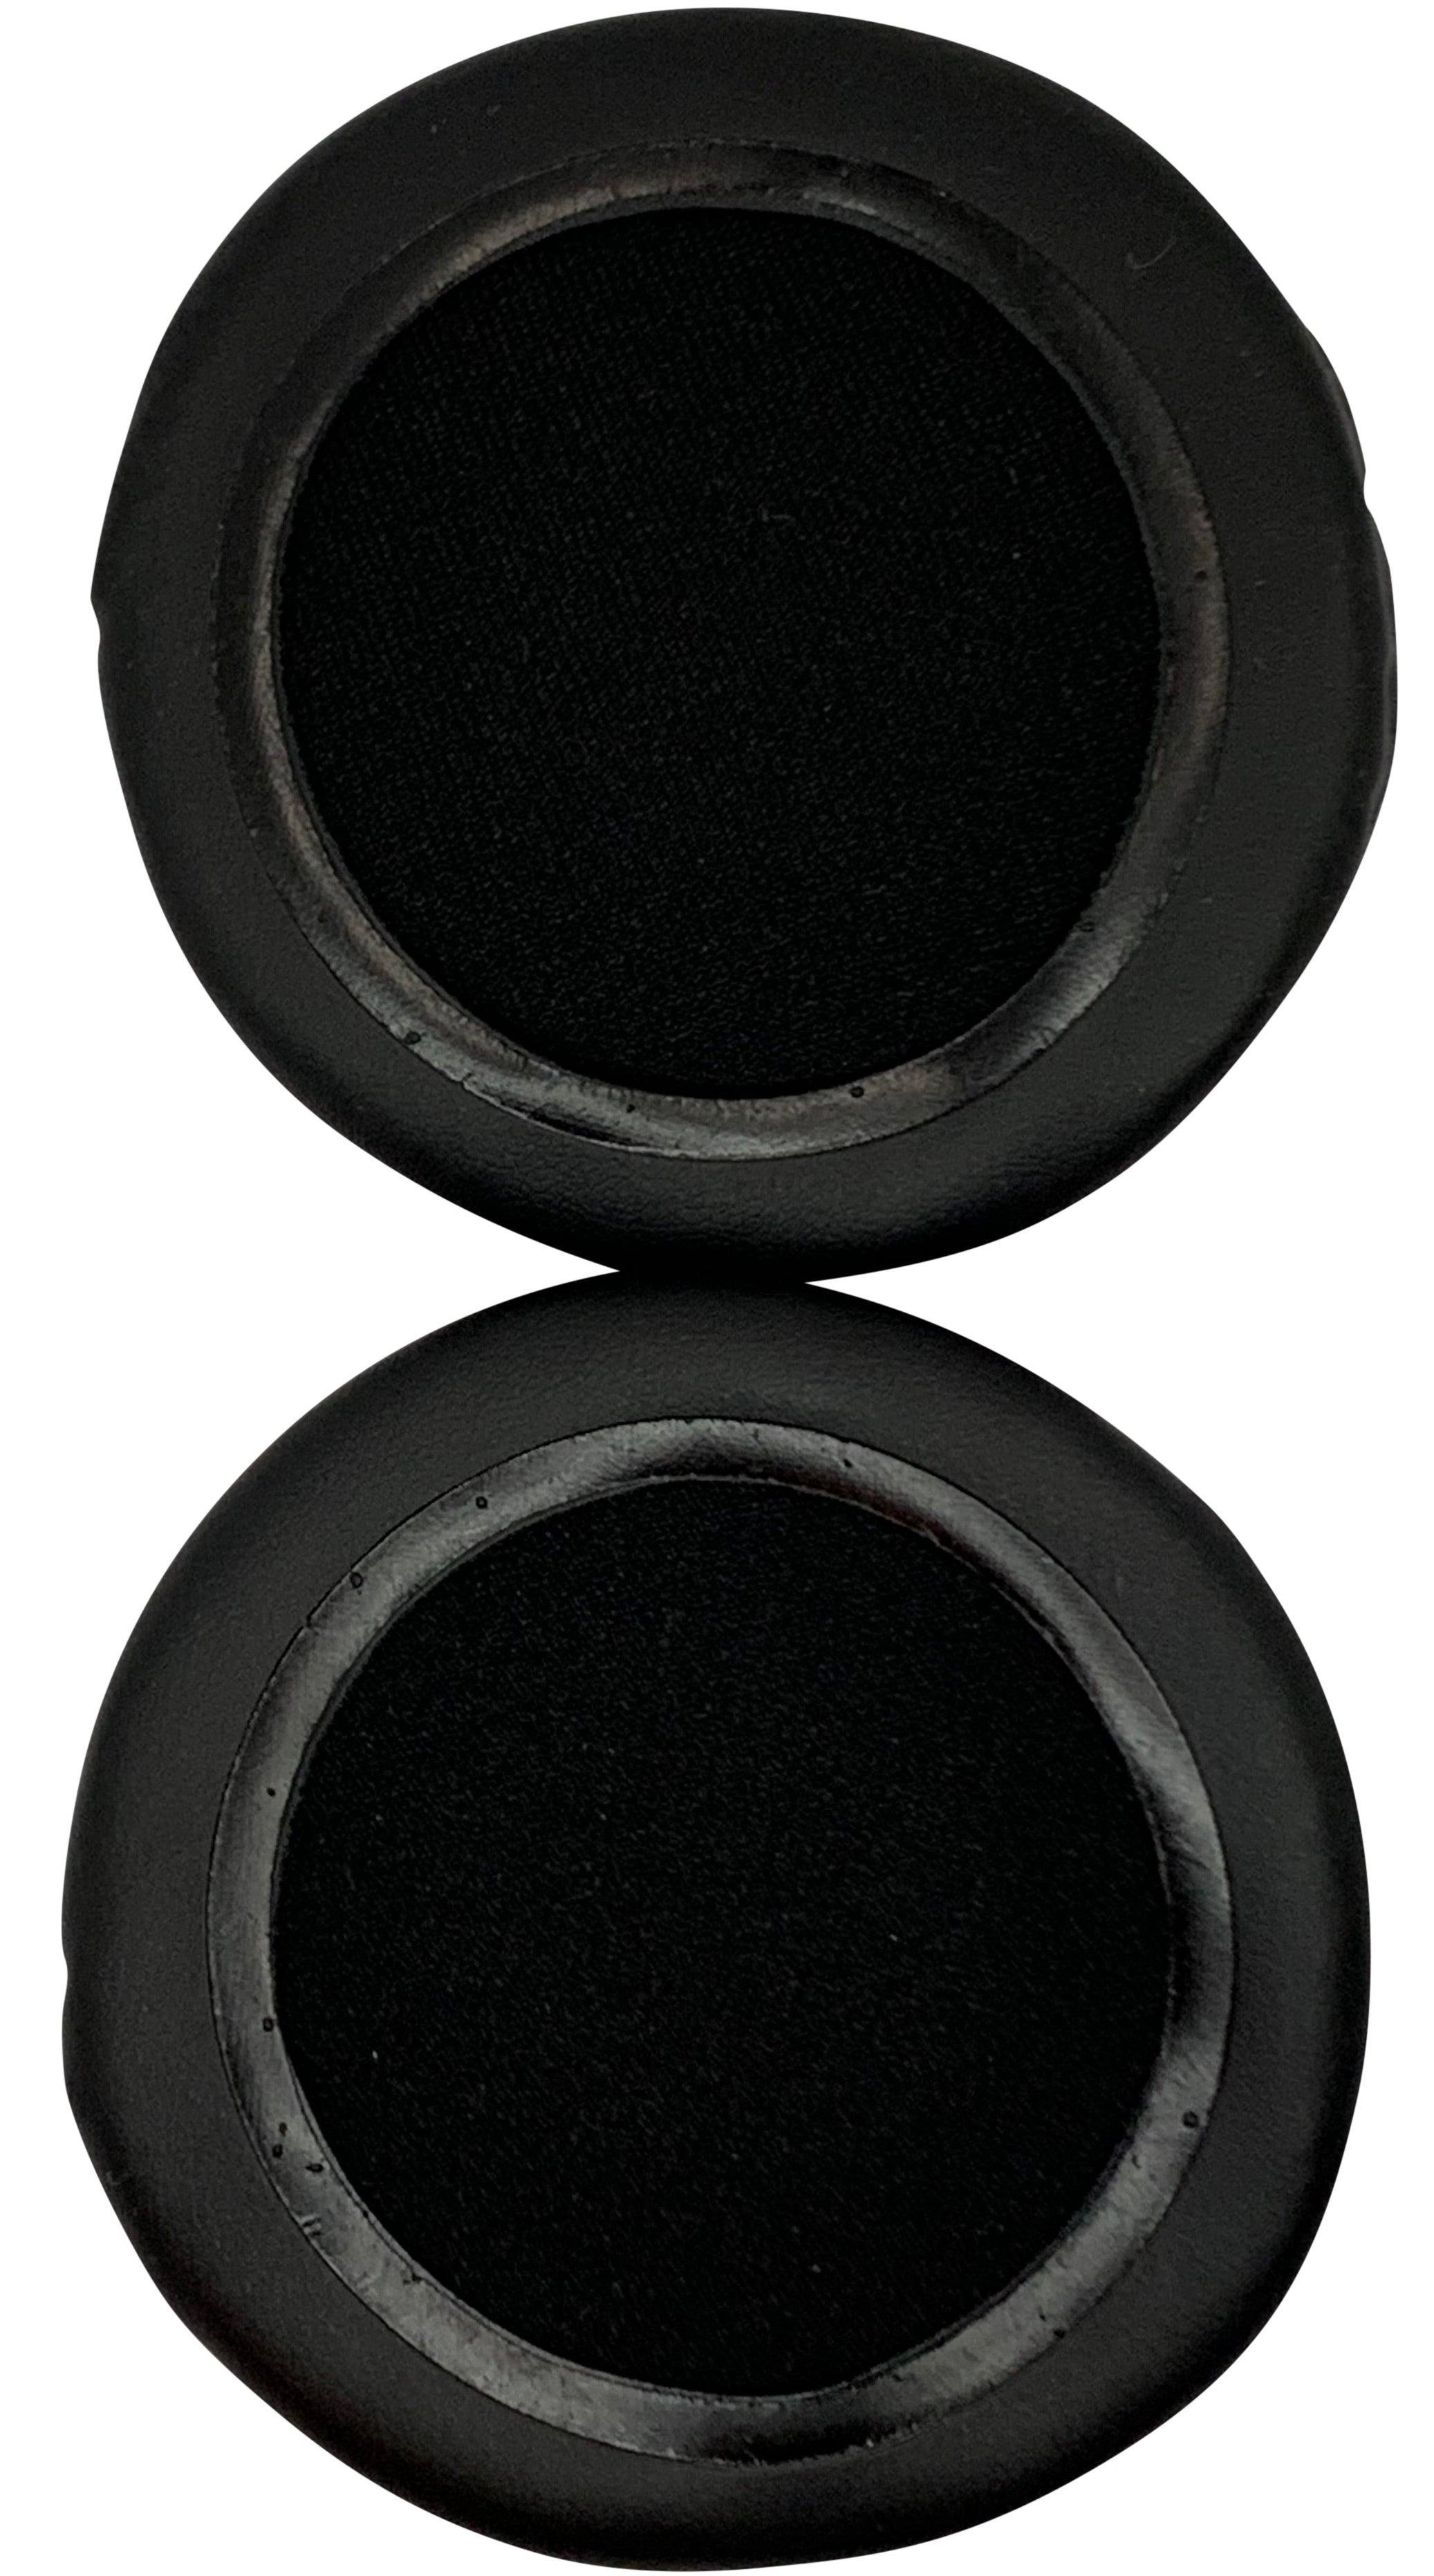 Premium CentralSound Replacement Ear Pad Cushions for Audio-Technica Headphones ATH-WS70 ATH-WS77 ATH-WS99 - CentralSound